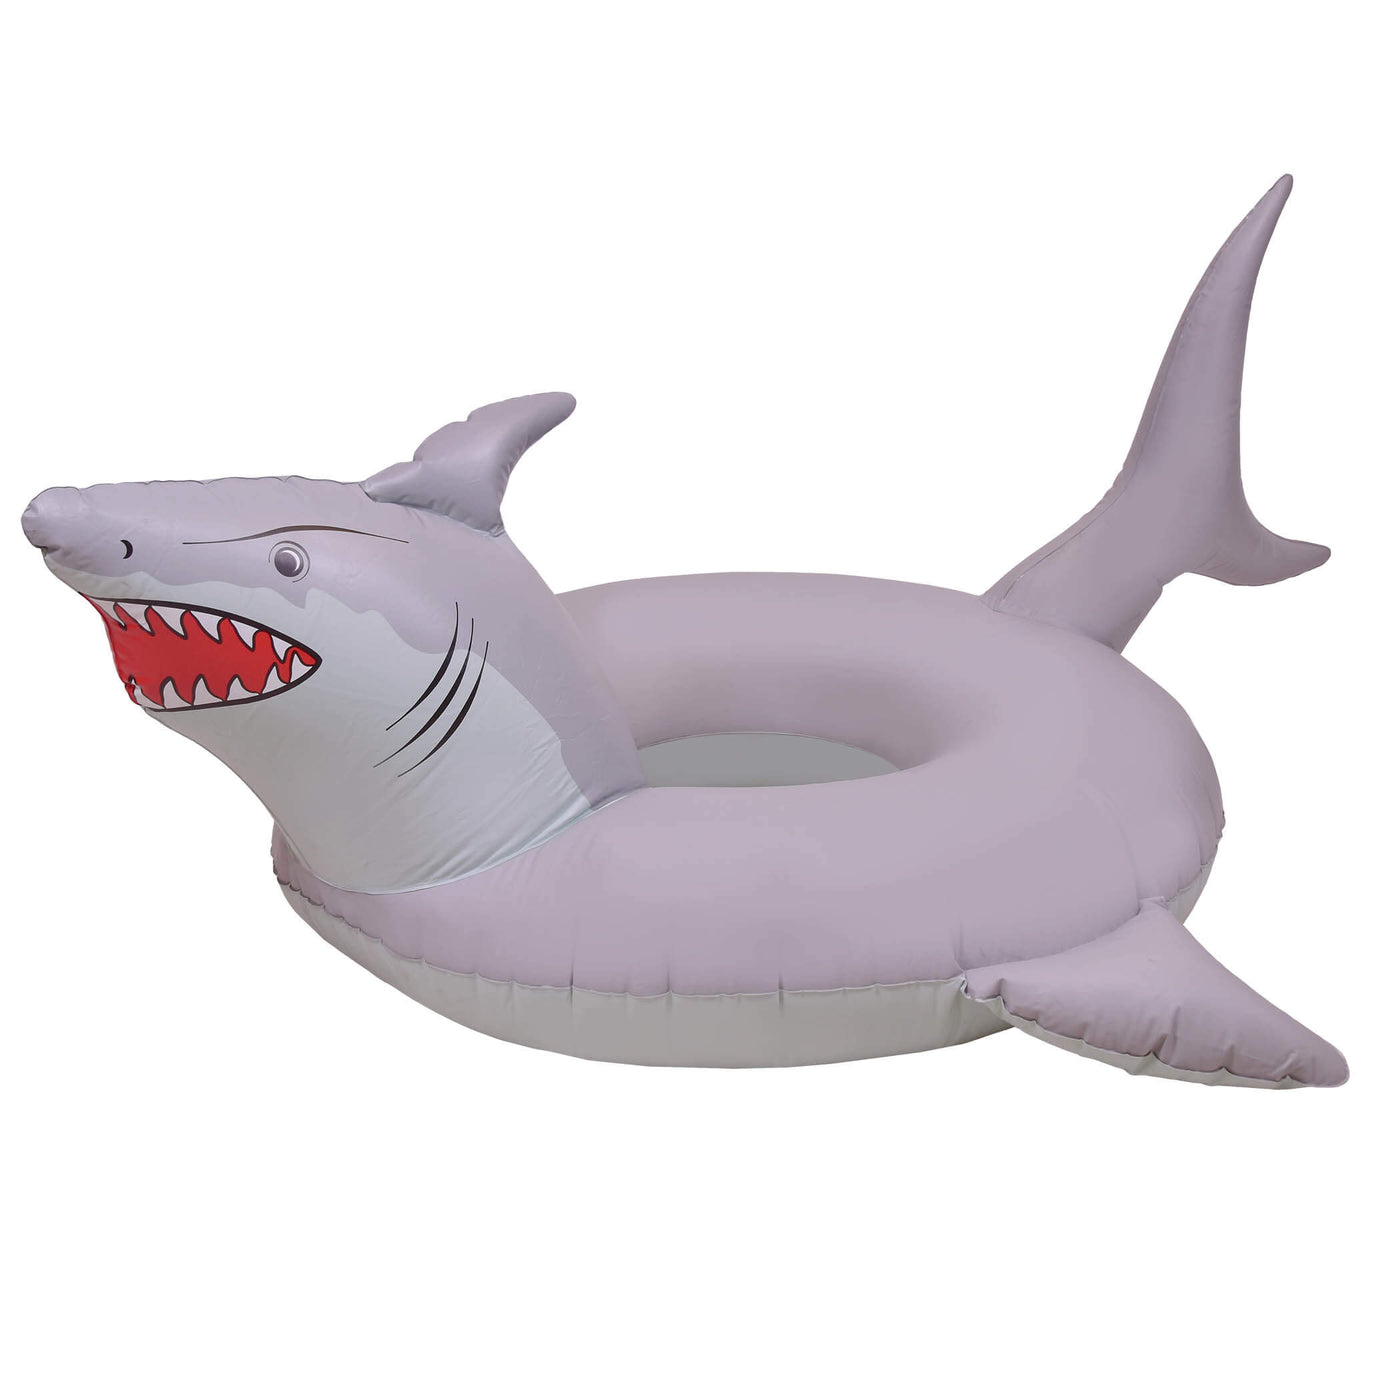 GoFloats Party Tube Inflatable Raft - Chewy the Shark | GoFloats.com ...